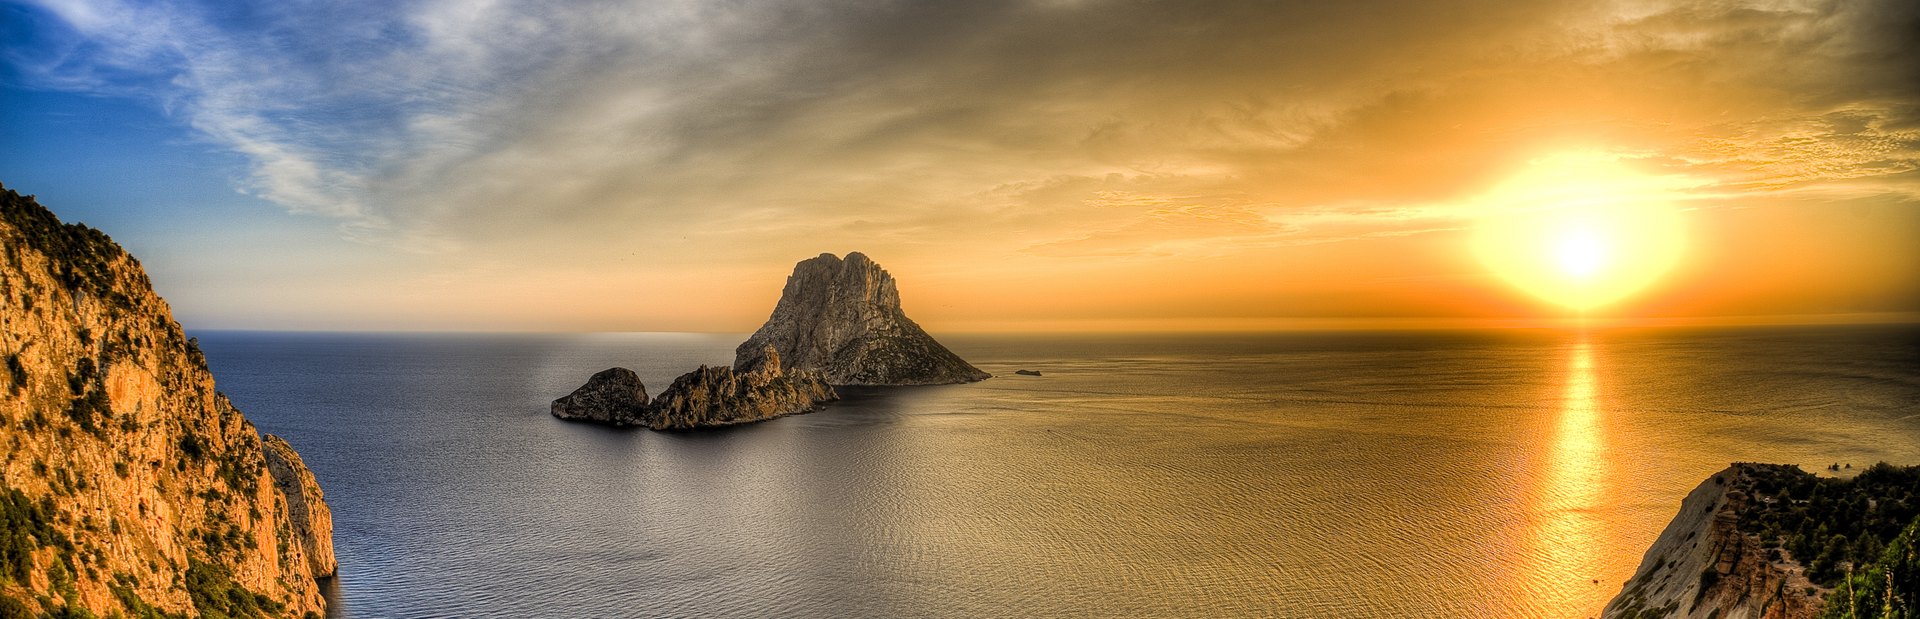 An insider’s guide to Ibiza yacht charters: the beaches and beats of the Balearics